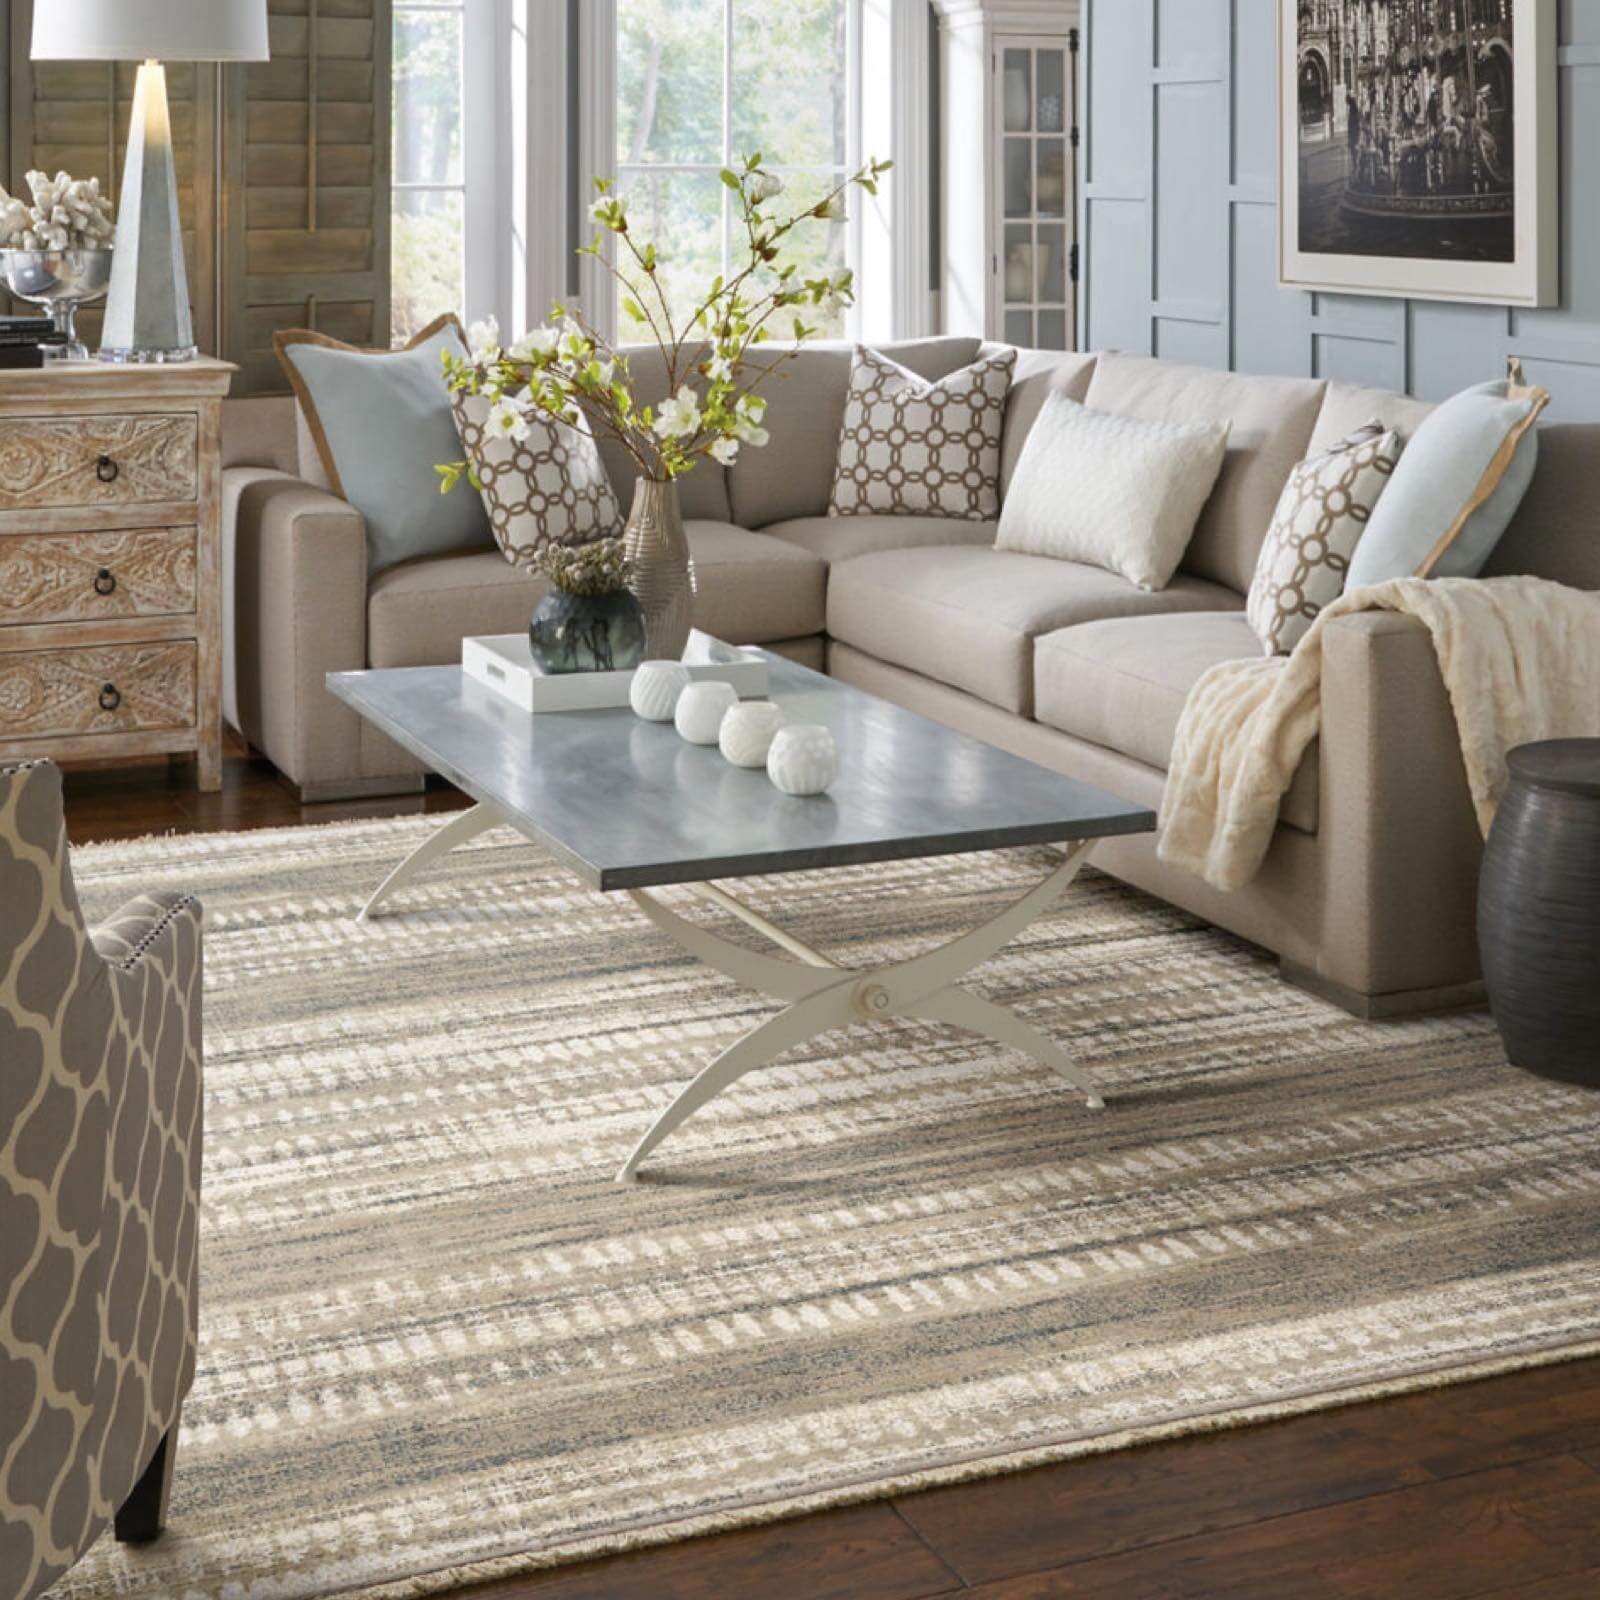 Area Rug for living room | Wellston Decorating Center, Inc.